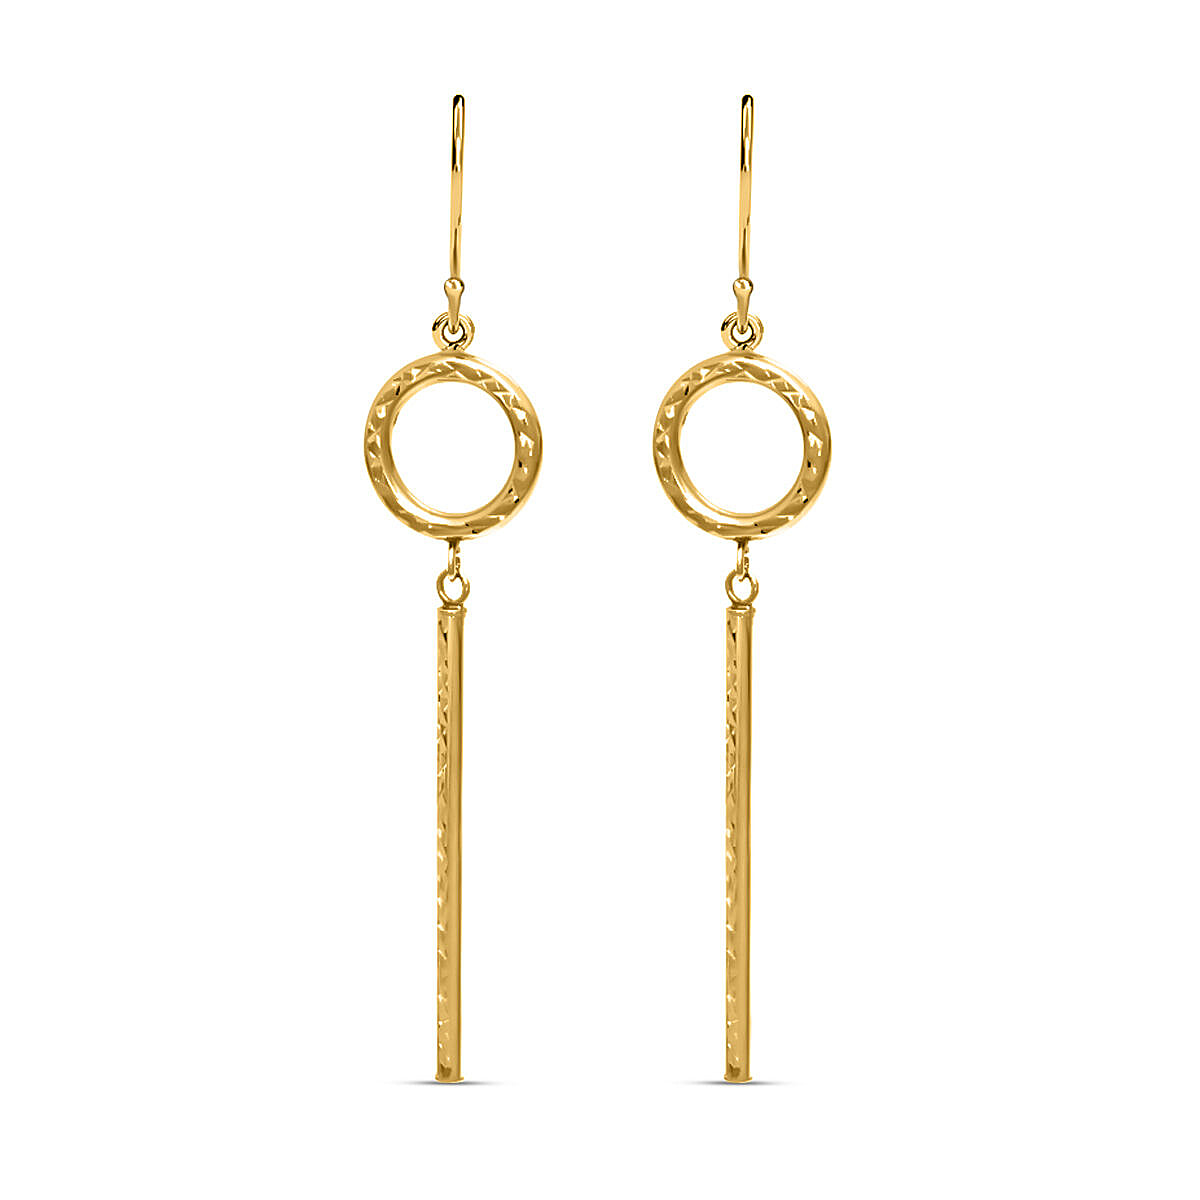 Maestro Collection - 9K Yellow Gold Stick and Circle Earrings